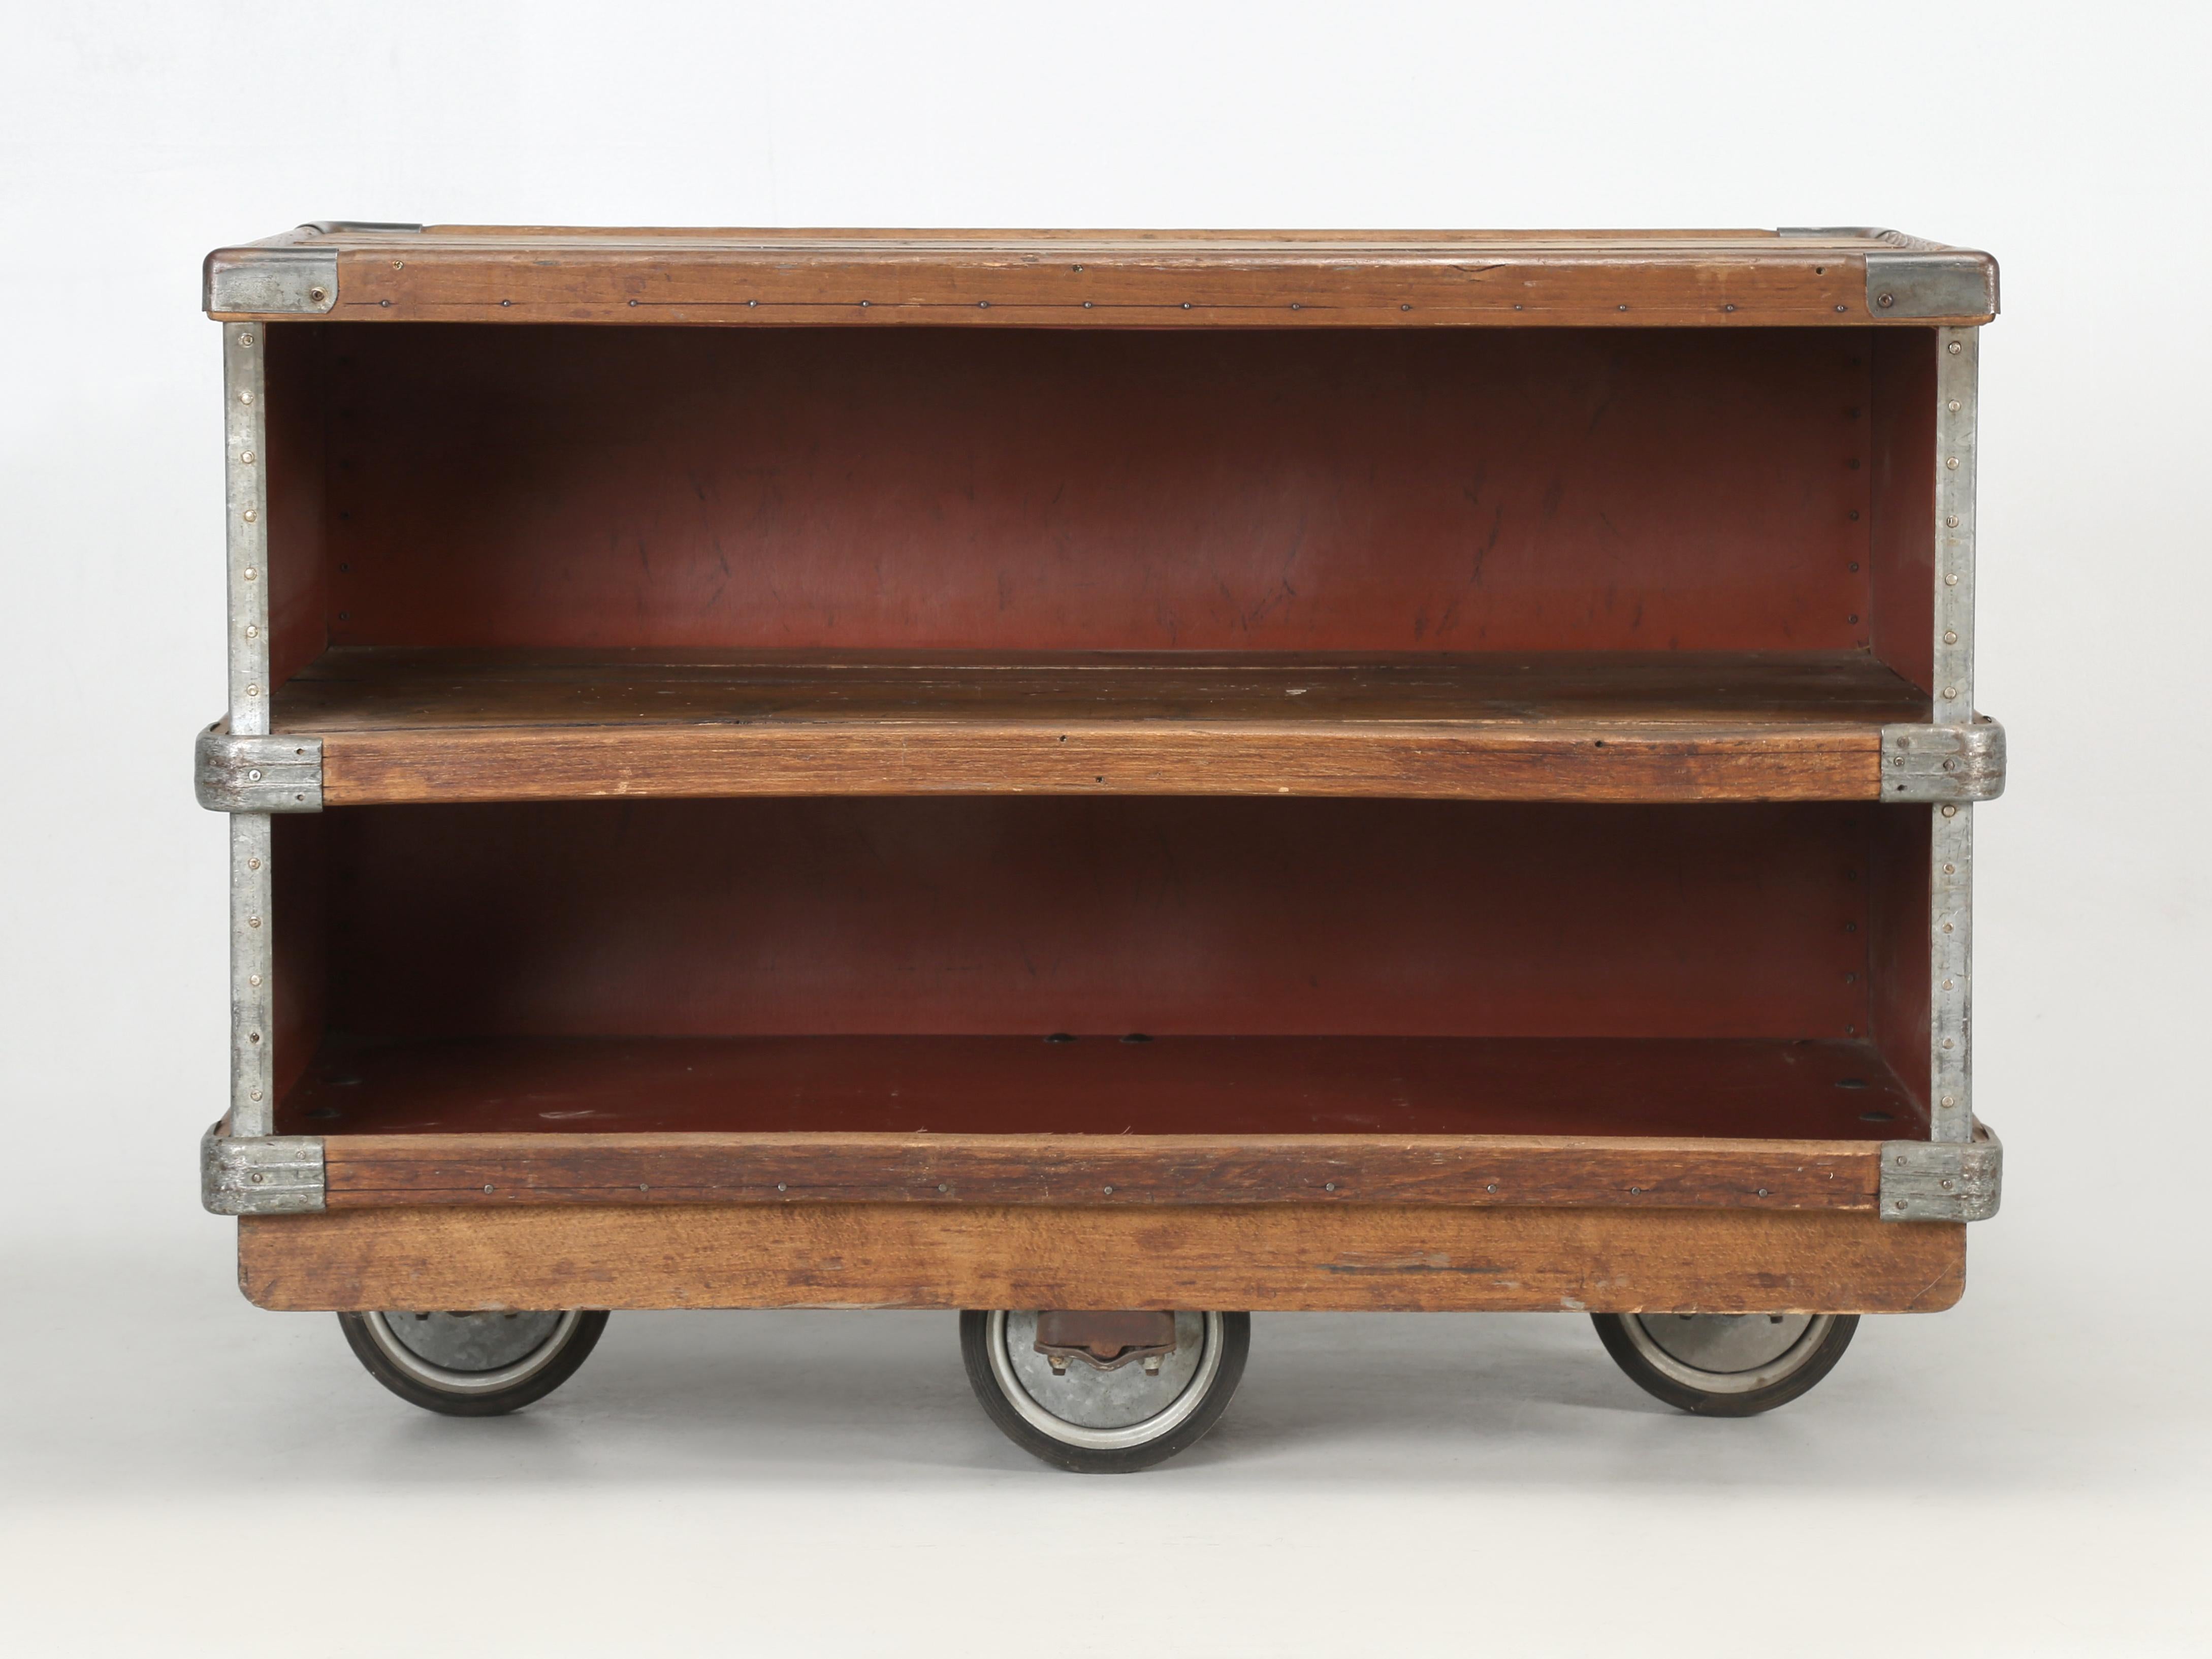 This is Old Plank's idea of a repurposed original French Suroy Industrial Mobile Storage Unit, converted into a more practical Bar Cart. By 1853 the industrial textile revolution arrived in Loos, France with the creation of the Esquermes factory. We